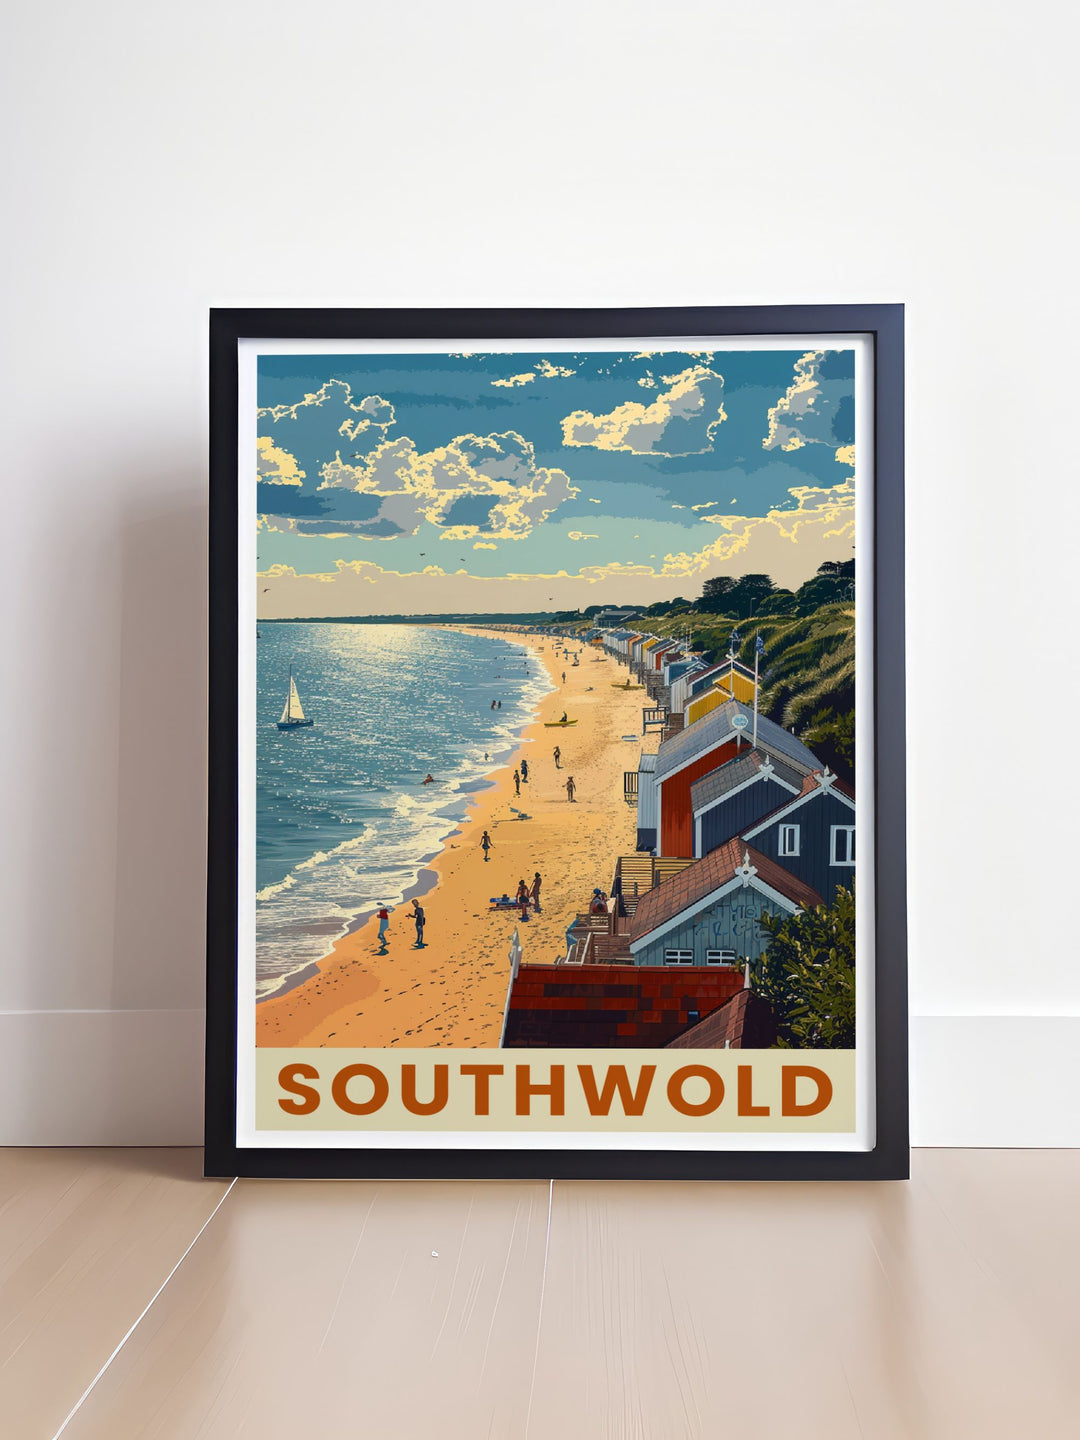 Framed Print of Southwold showcasing the beach and beach huts Southwold Lighthouse and pier a perfect UK travel poster for those who love seaside art and wish to bring a piece of coastal charm into their living space